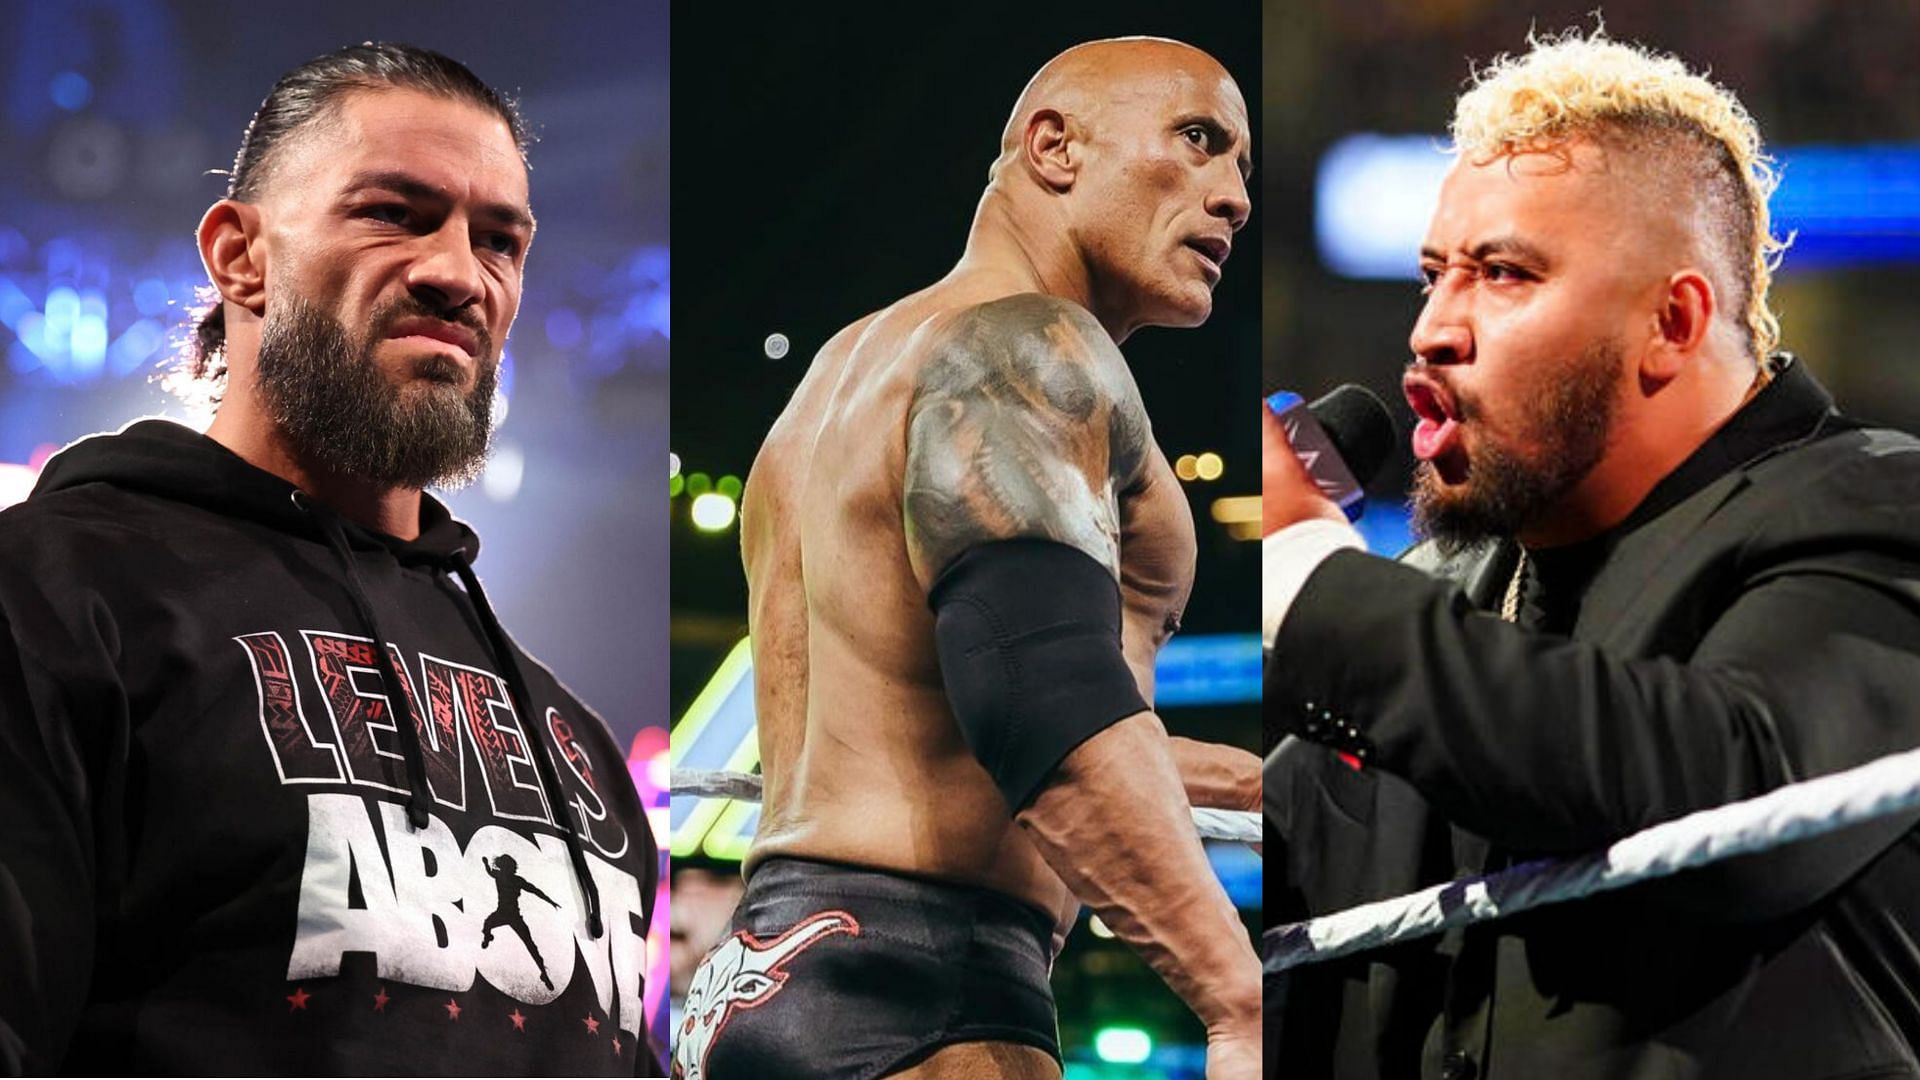 Could The Rock or Solo Sikoa take over The Bloodline from Roman Reigns?